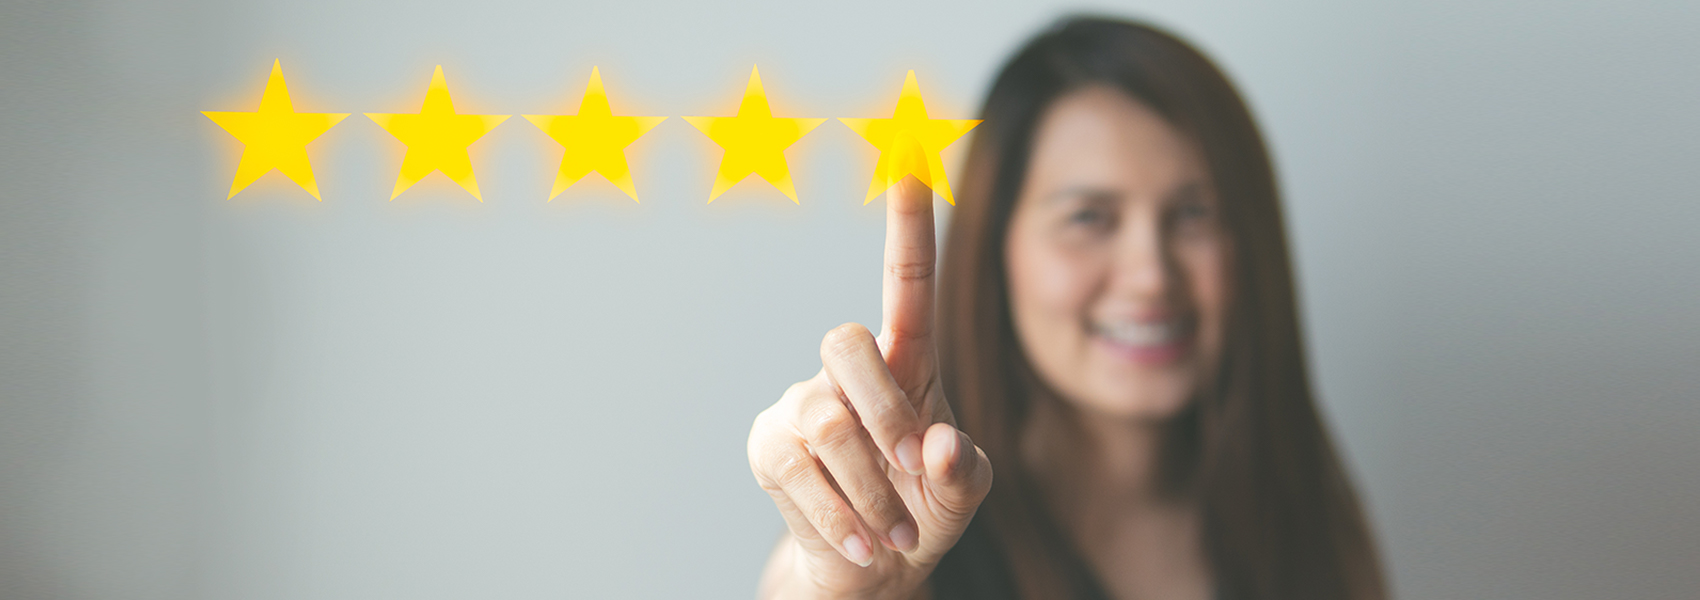 woman pointing to the 5th of 5 yellow stars to signify successful marketing